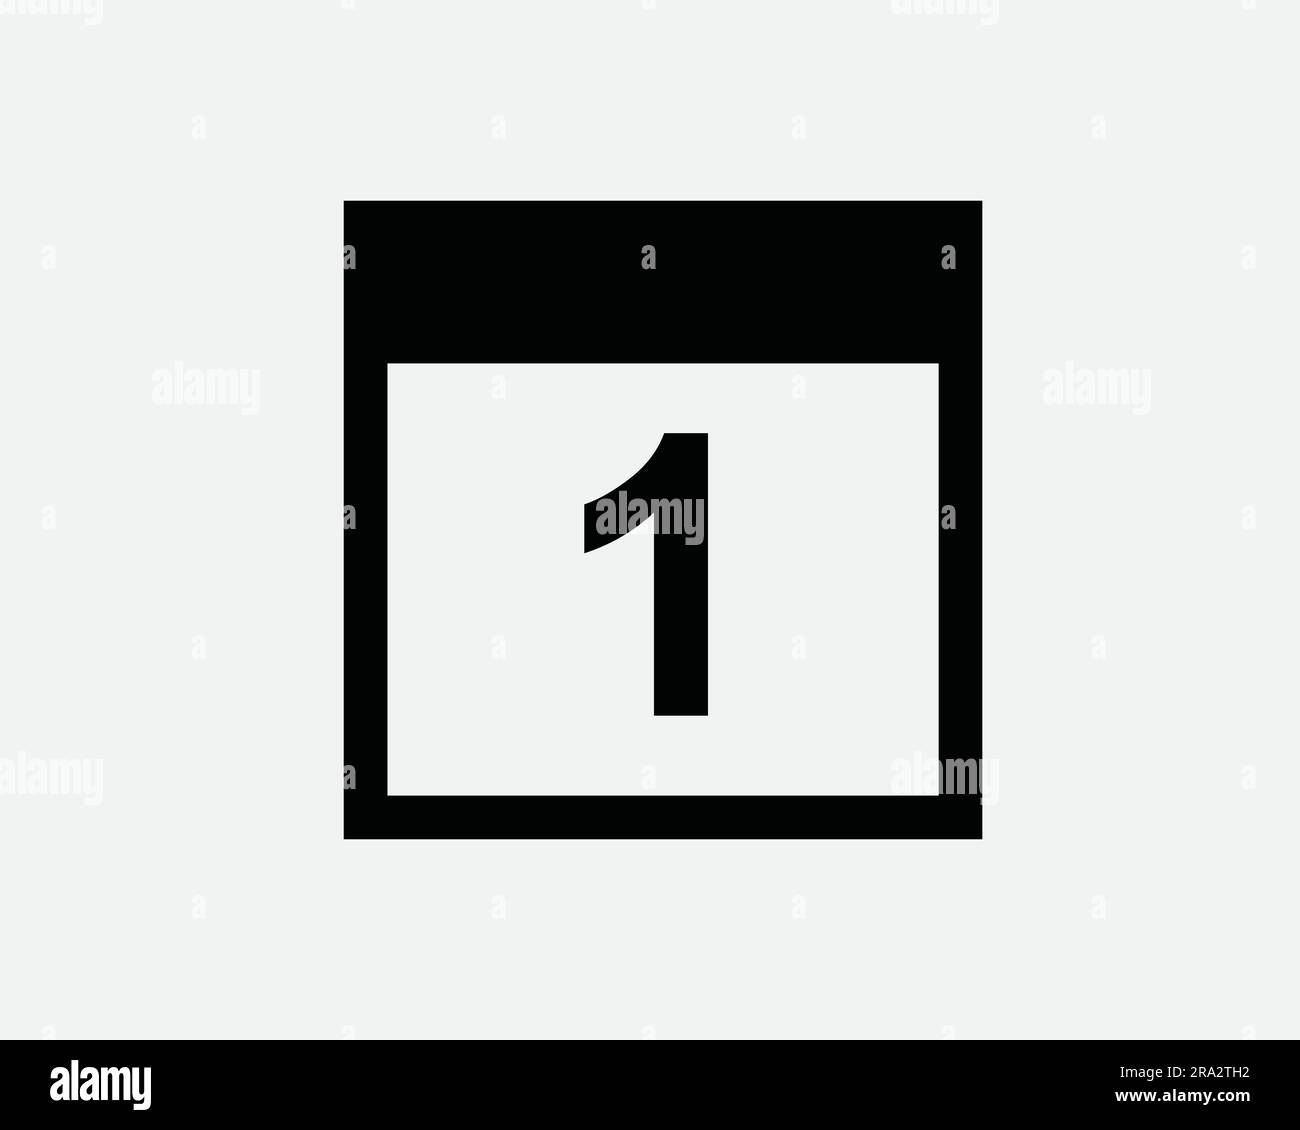 Calendar Icon Date Dateline Schedule Appointment Month Day Page Number One 1 Organize Plan Black White Graphic Clipart Artwork Symbol Sign Vector EPS Stock Vector